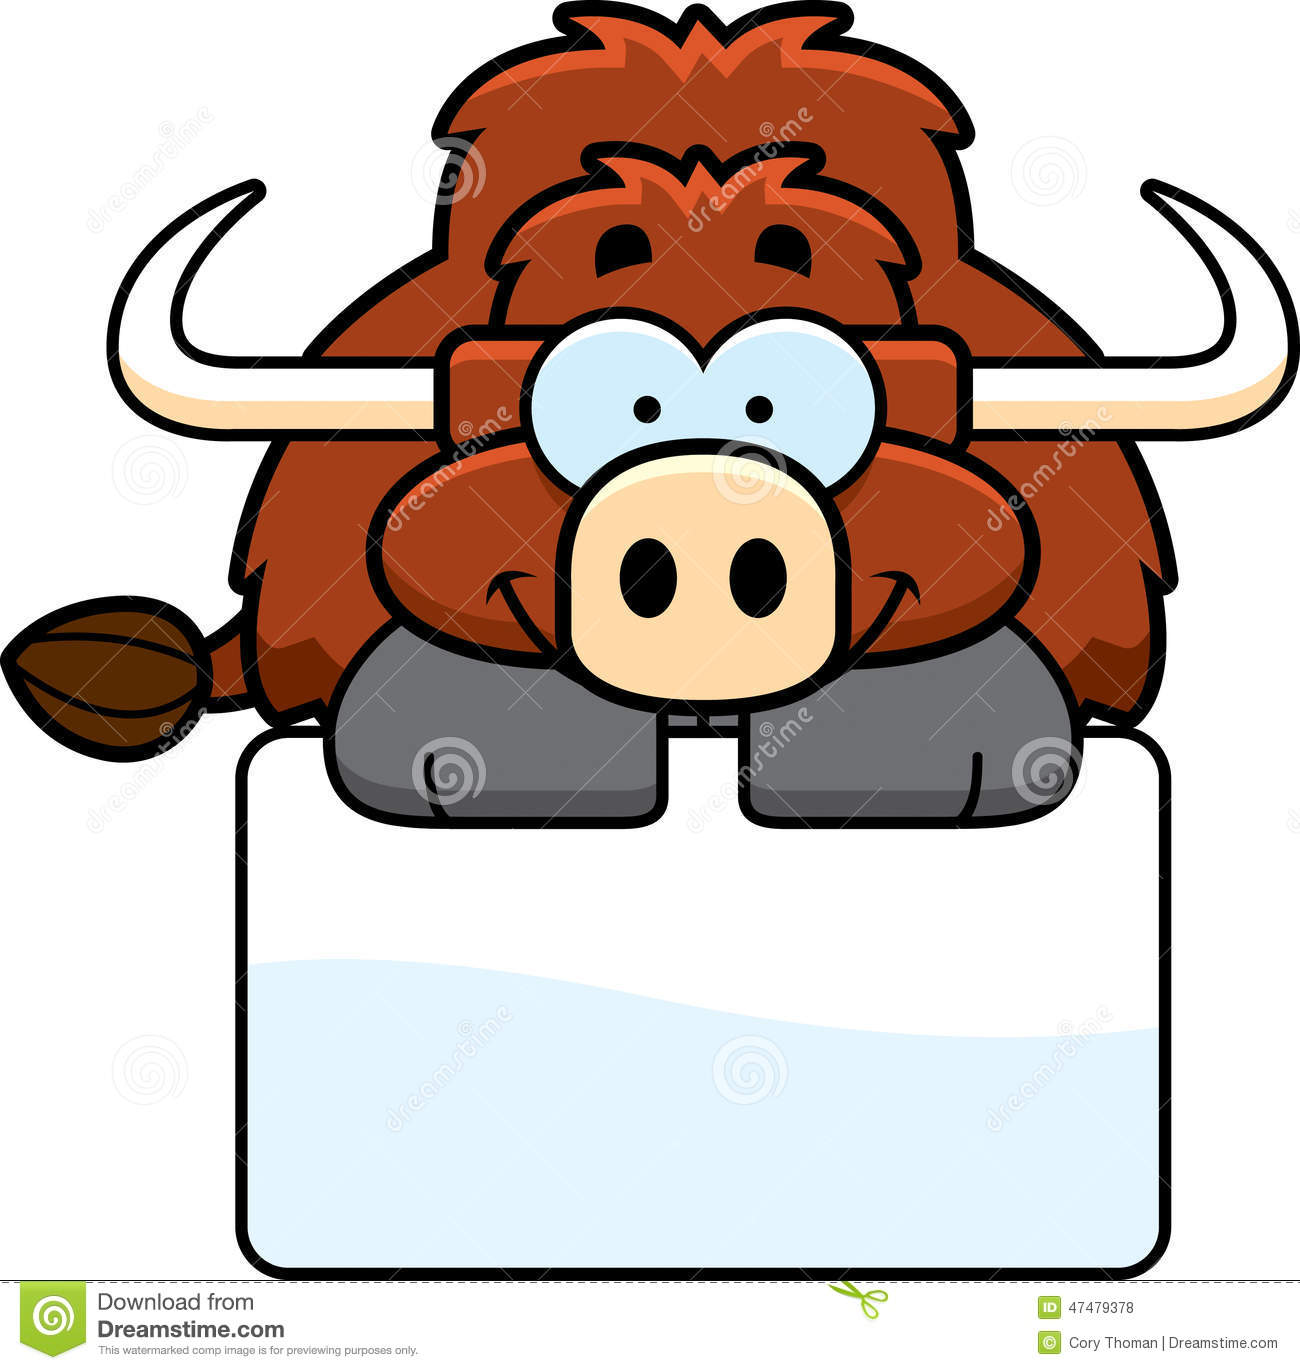 Cartoon Illustration Of A Little Yak With A White Sign